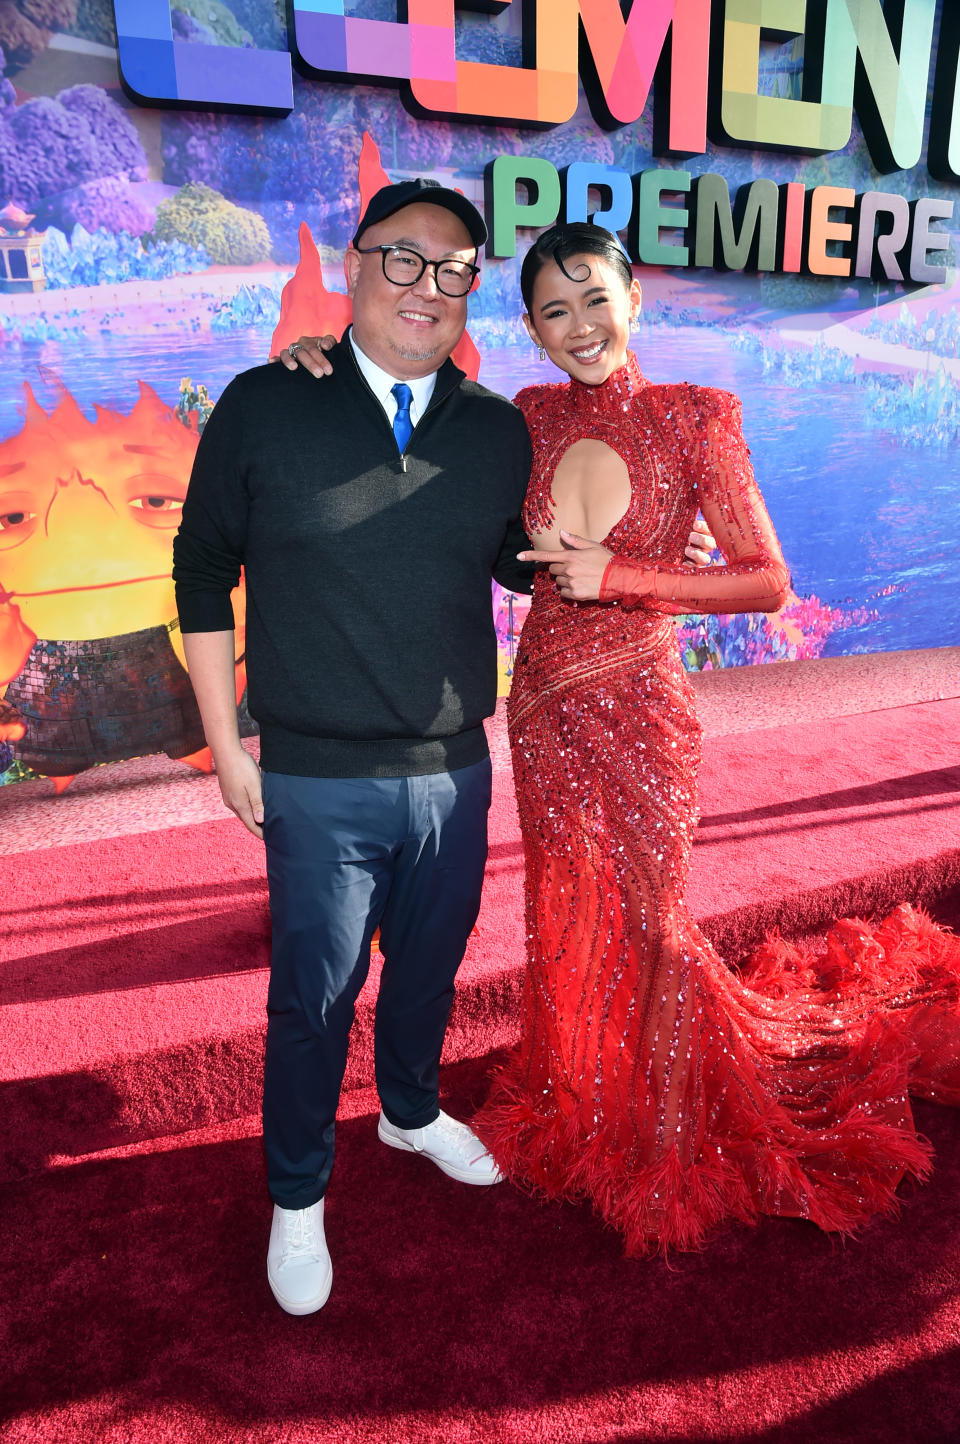 LOS ANGELES, CALIFORNIA - JUNE 08: (L-R) Peter Sohn and Leah Lewis attend the World Premiere of Disney and Pixar's feature film 